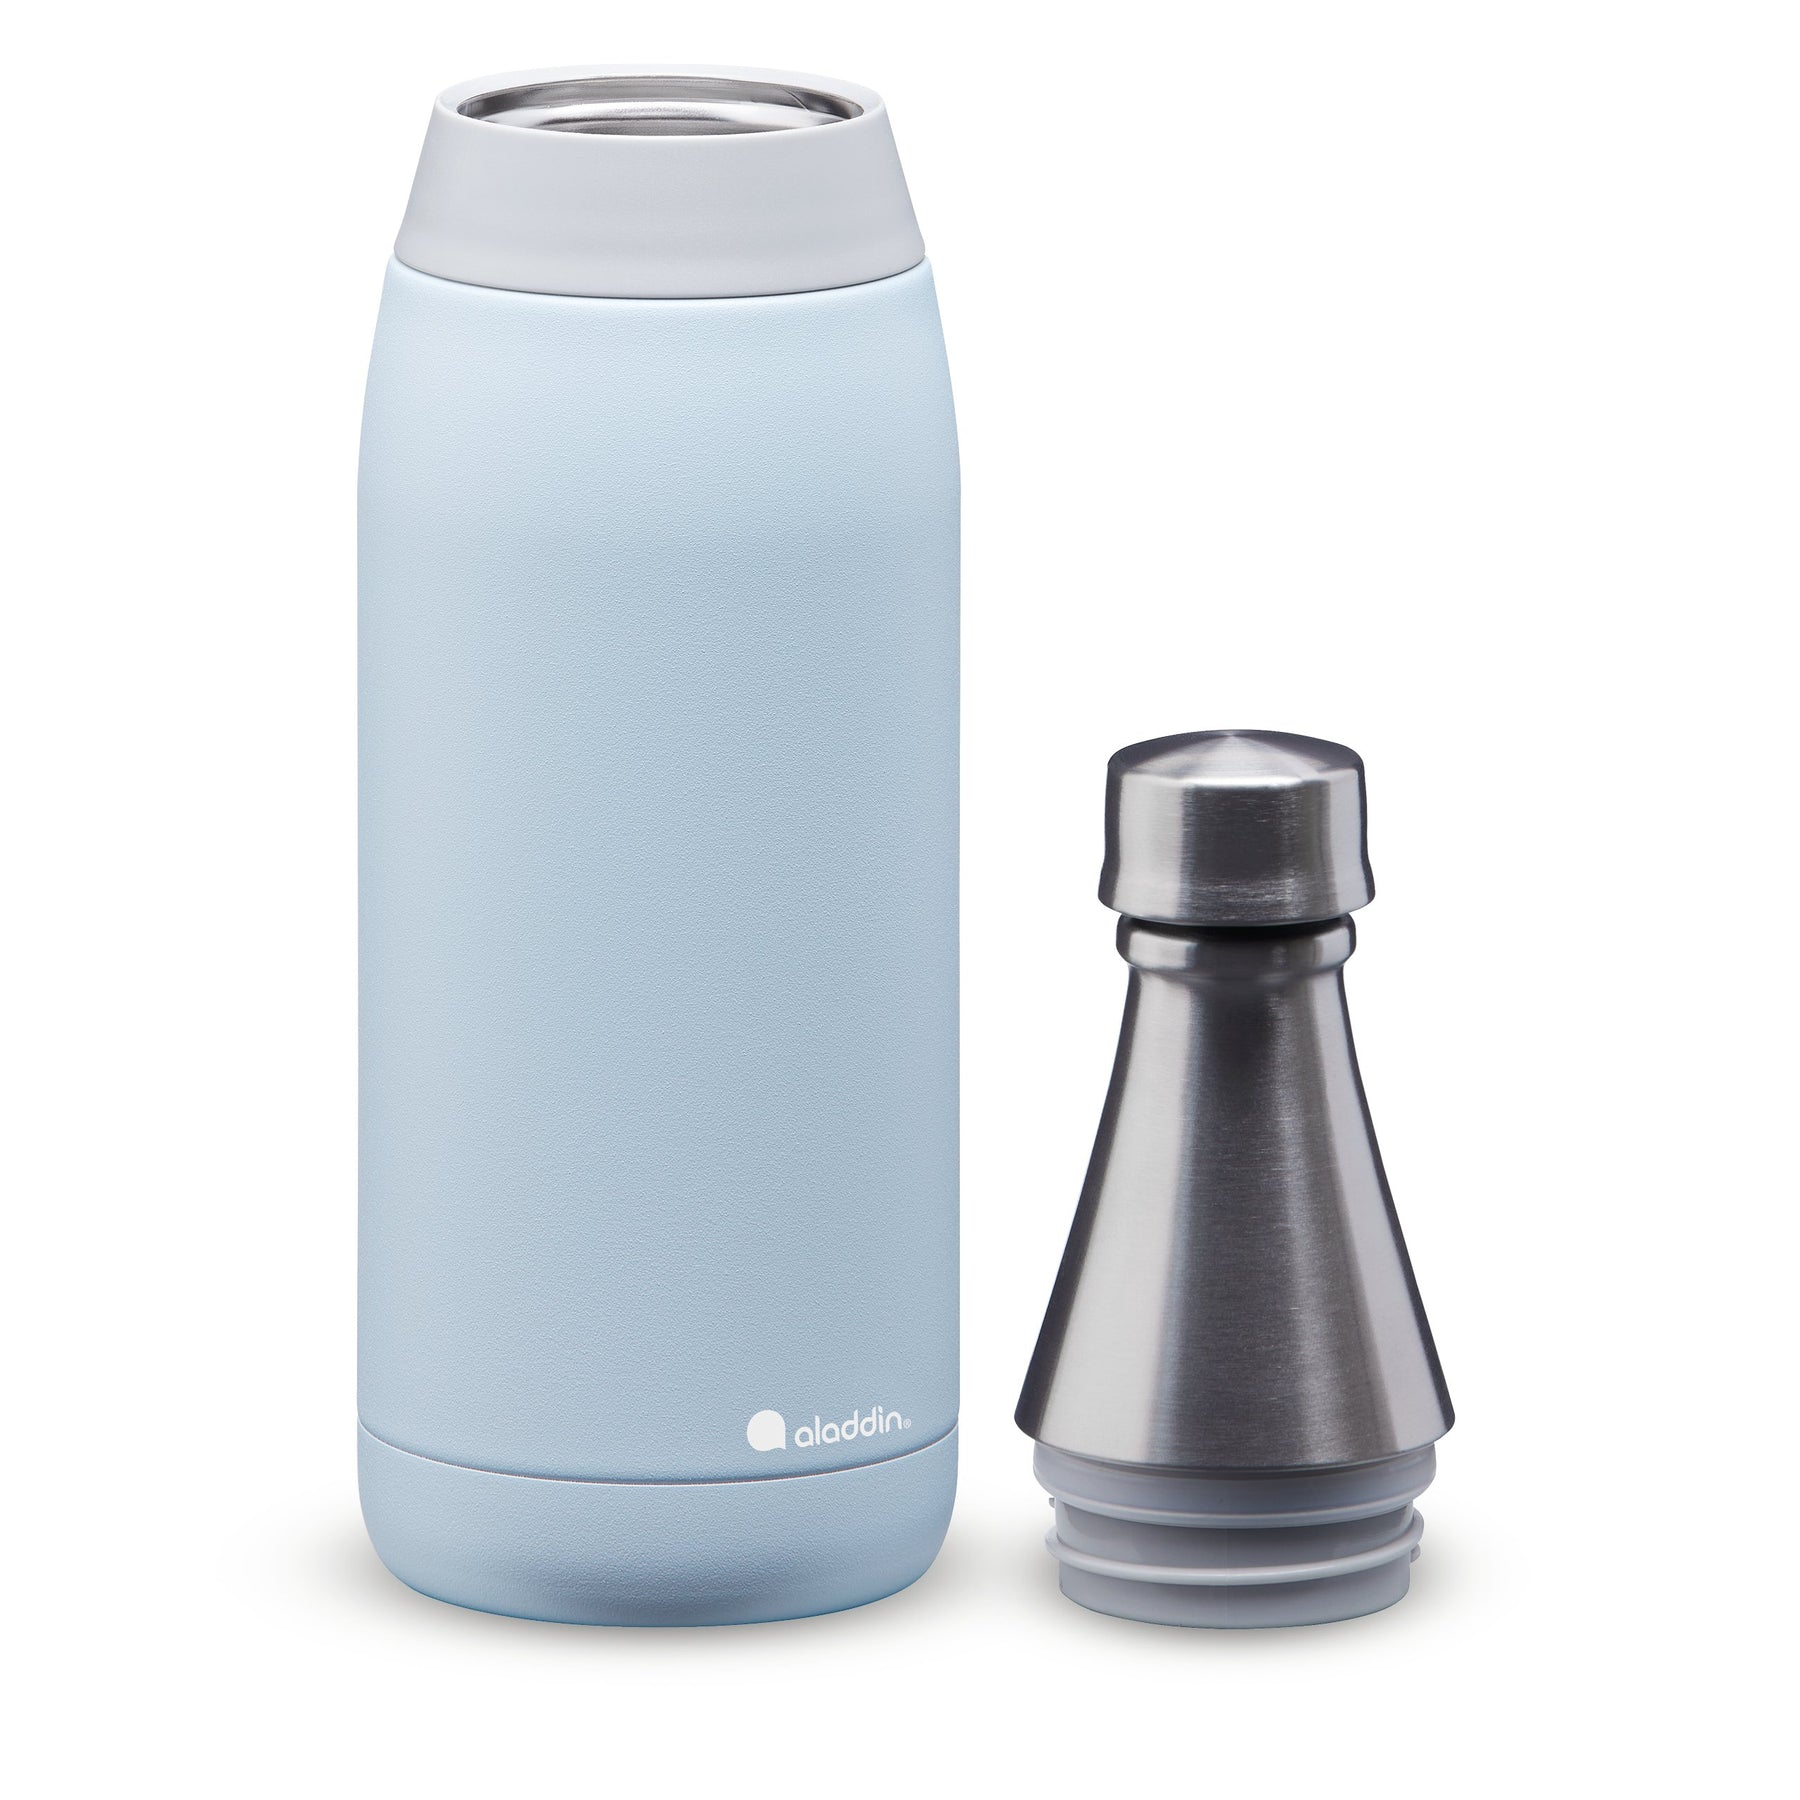 Aladdin-Fresco-Thermavac_-Stainless-Steel-Water-Bottle-0.6L-Sky-Blue-10-10098-007-Exploded_1800x1800